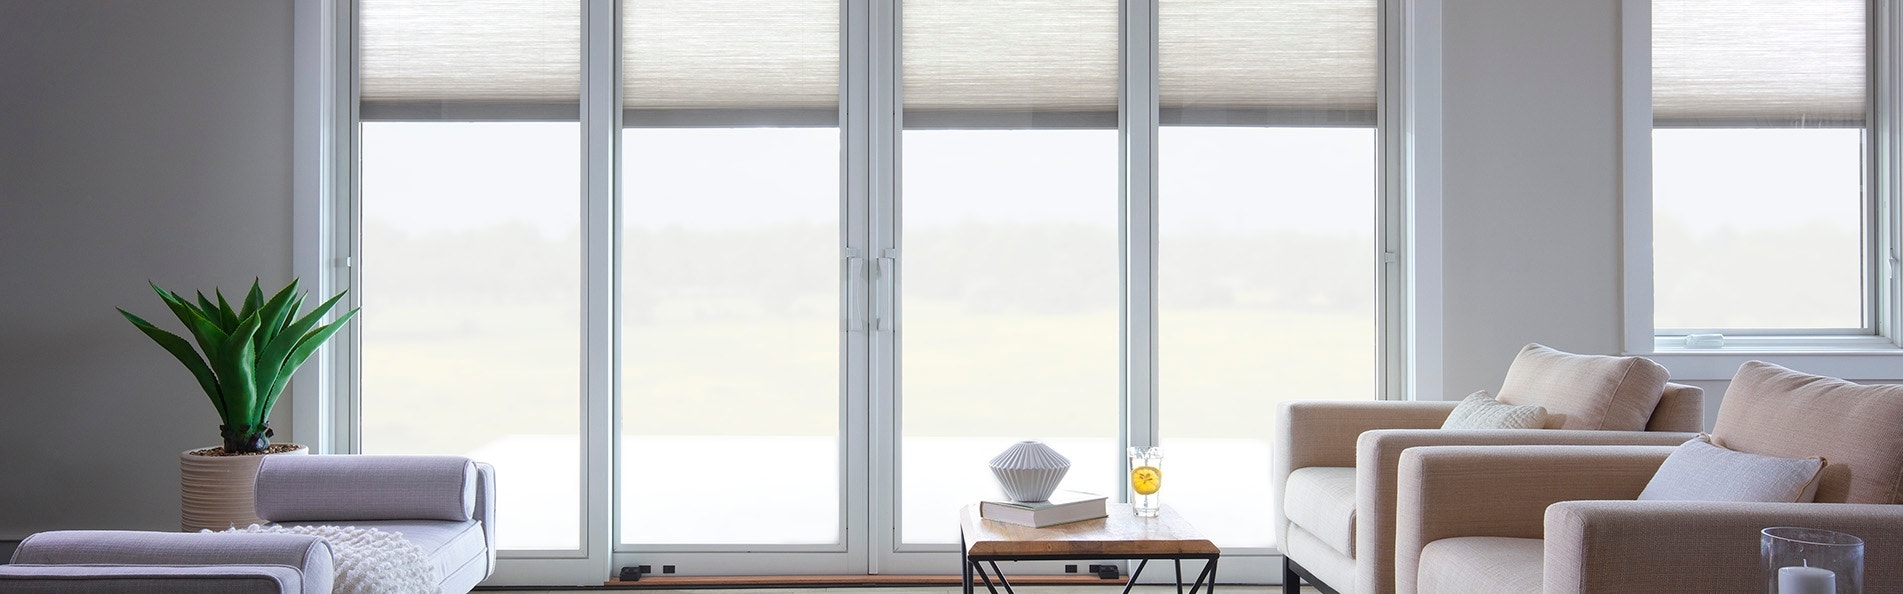 French lifestyle series sliding doors with blinds-between-the-glass